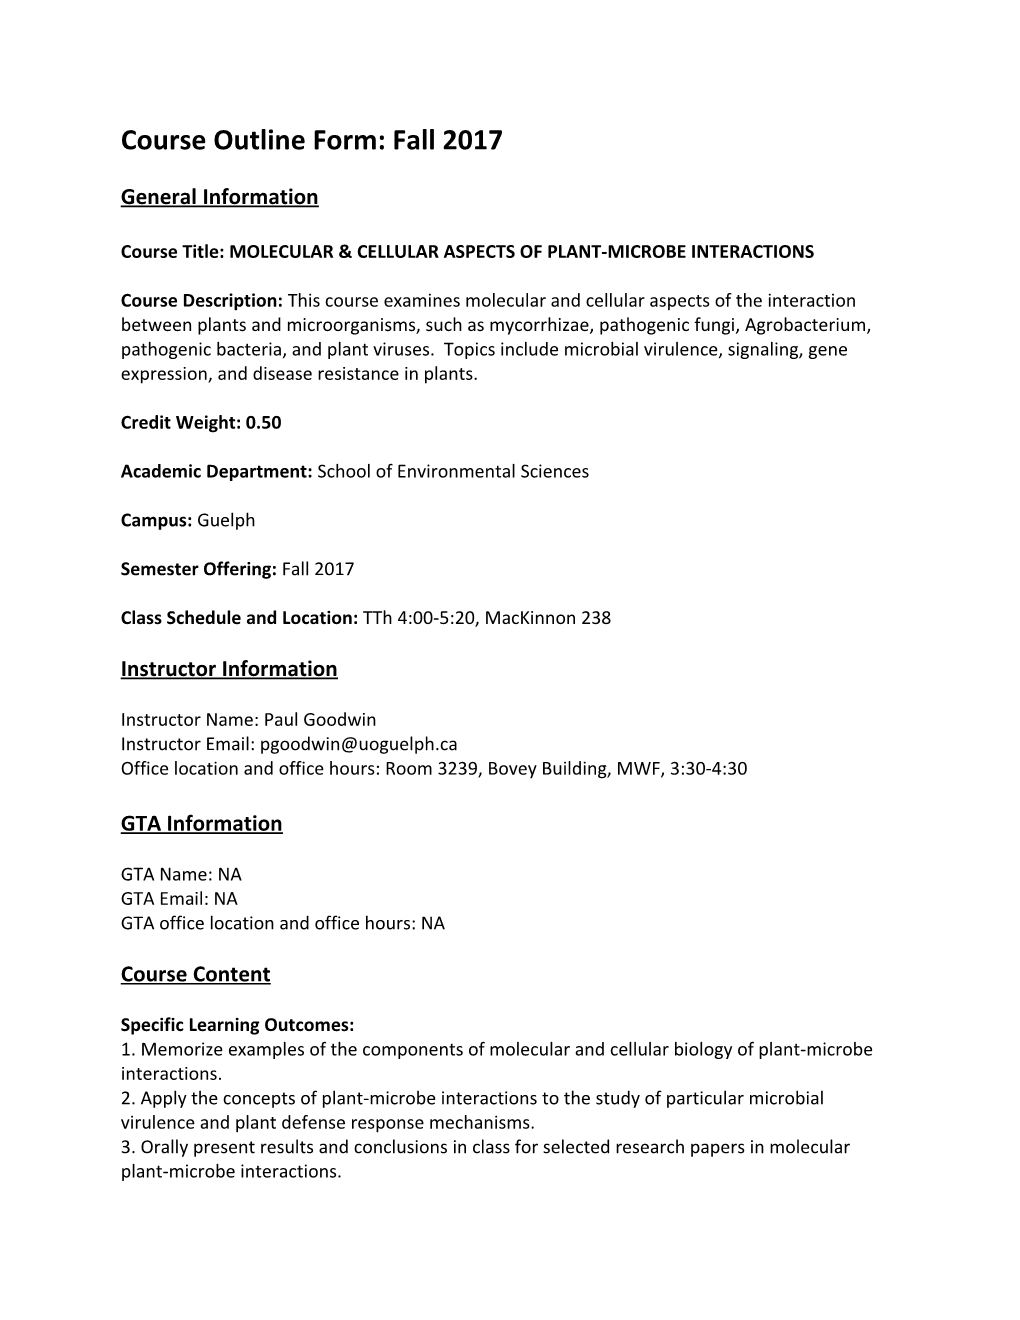 Undergraduate Course Outline Form for Fall 2015